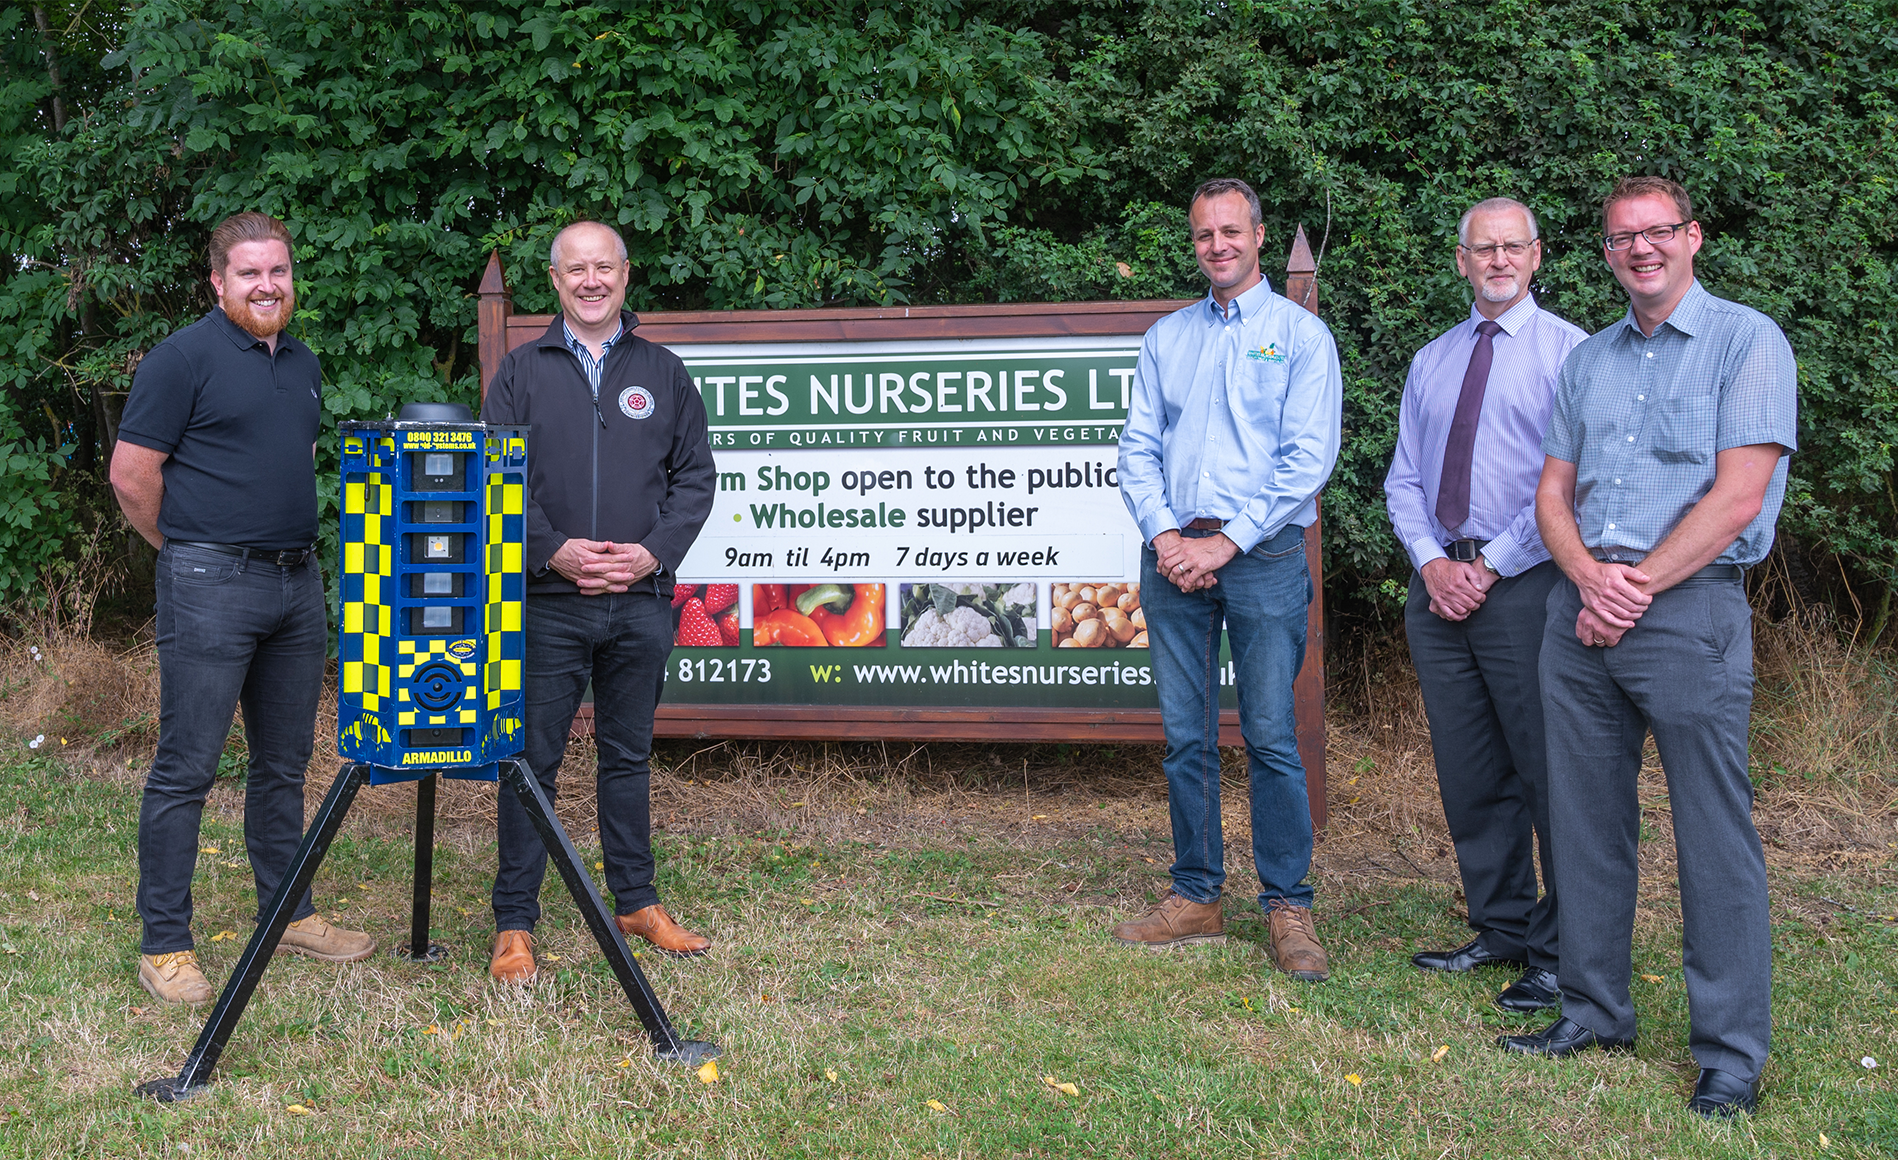 PID protects rural business Whites Nurseries in Earls Barton thanks to PFCC